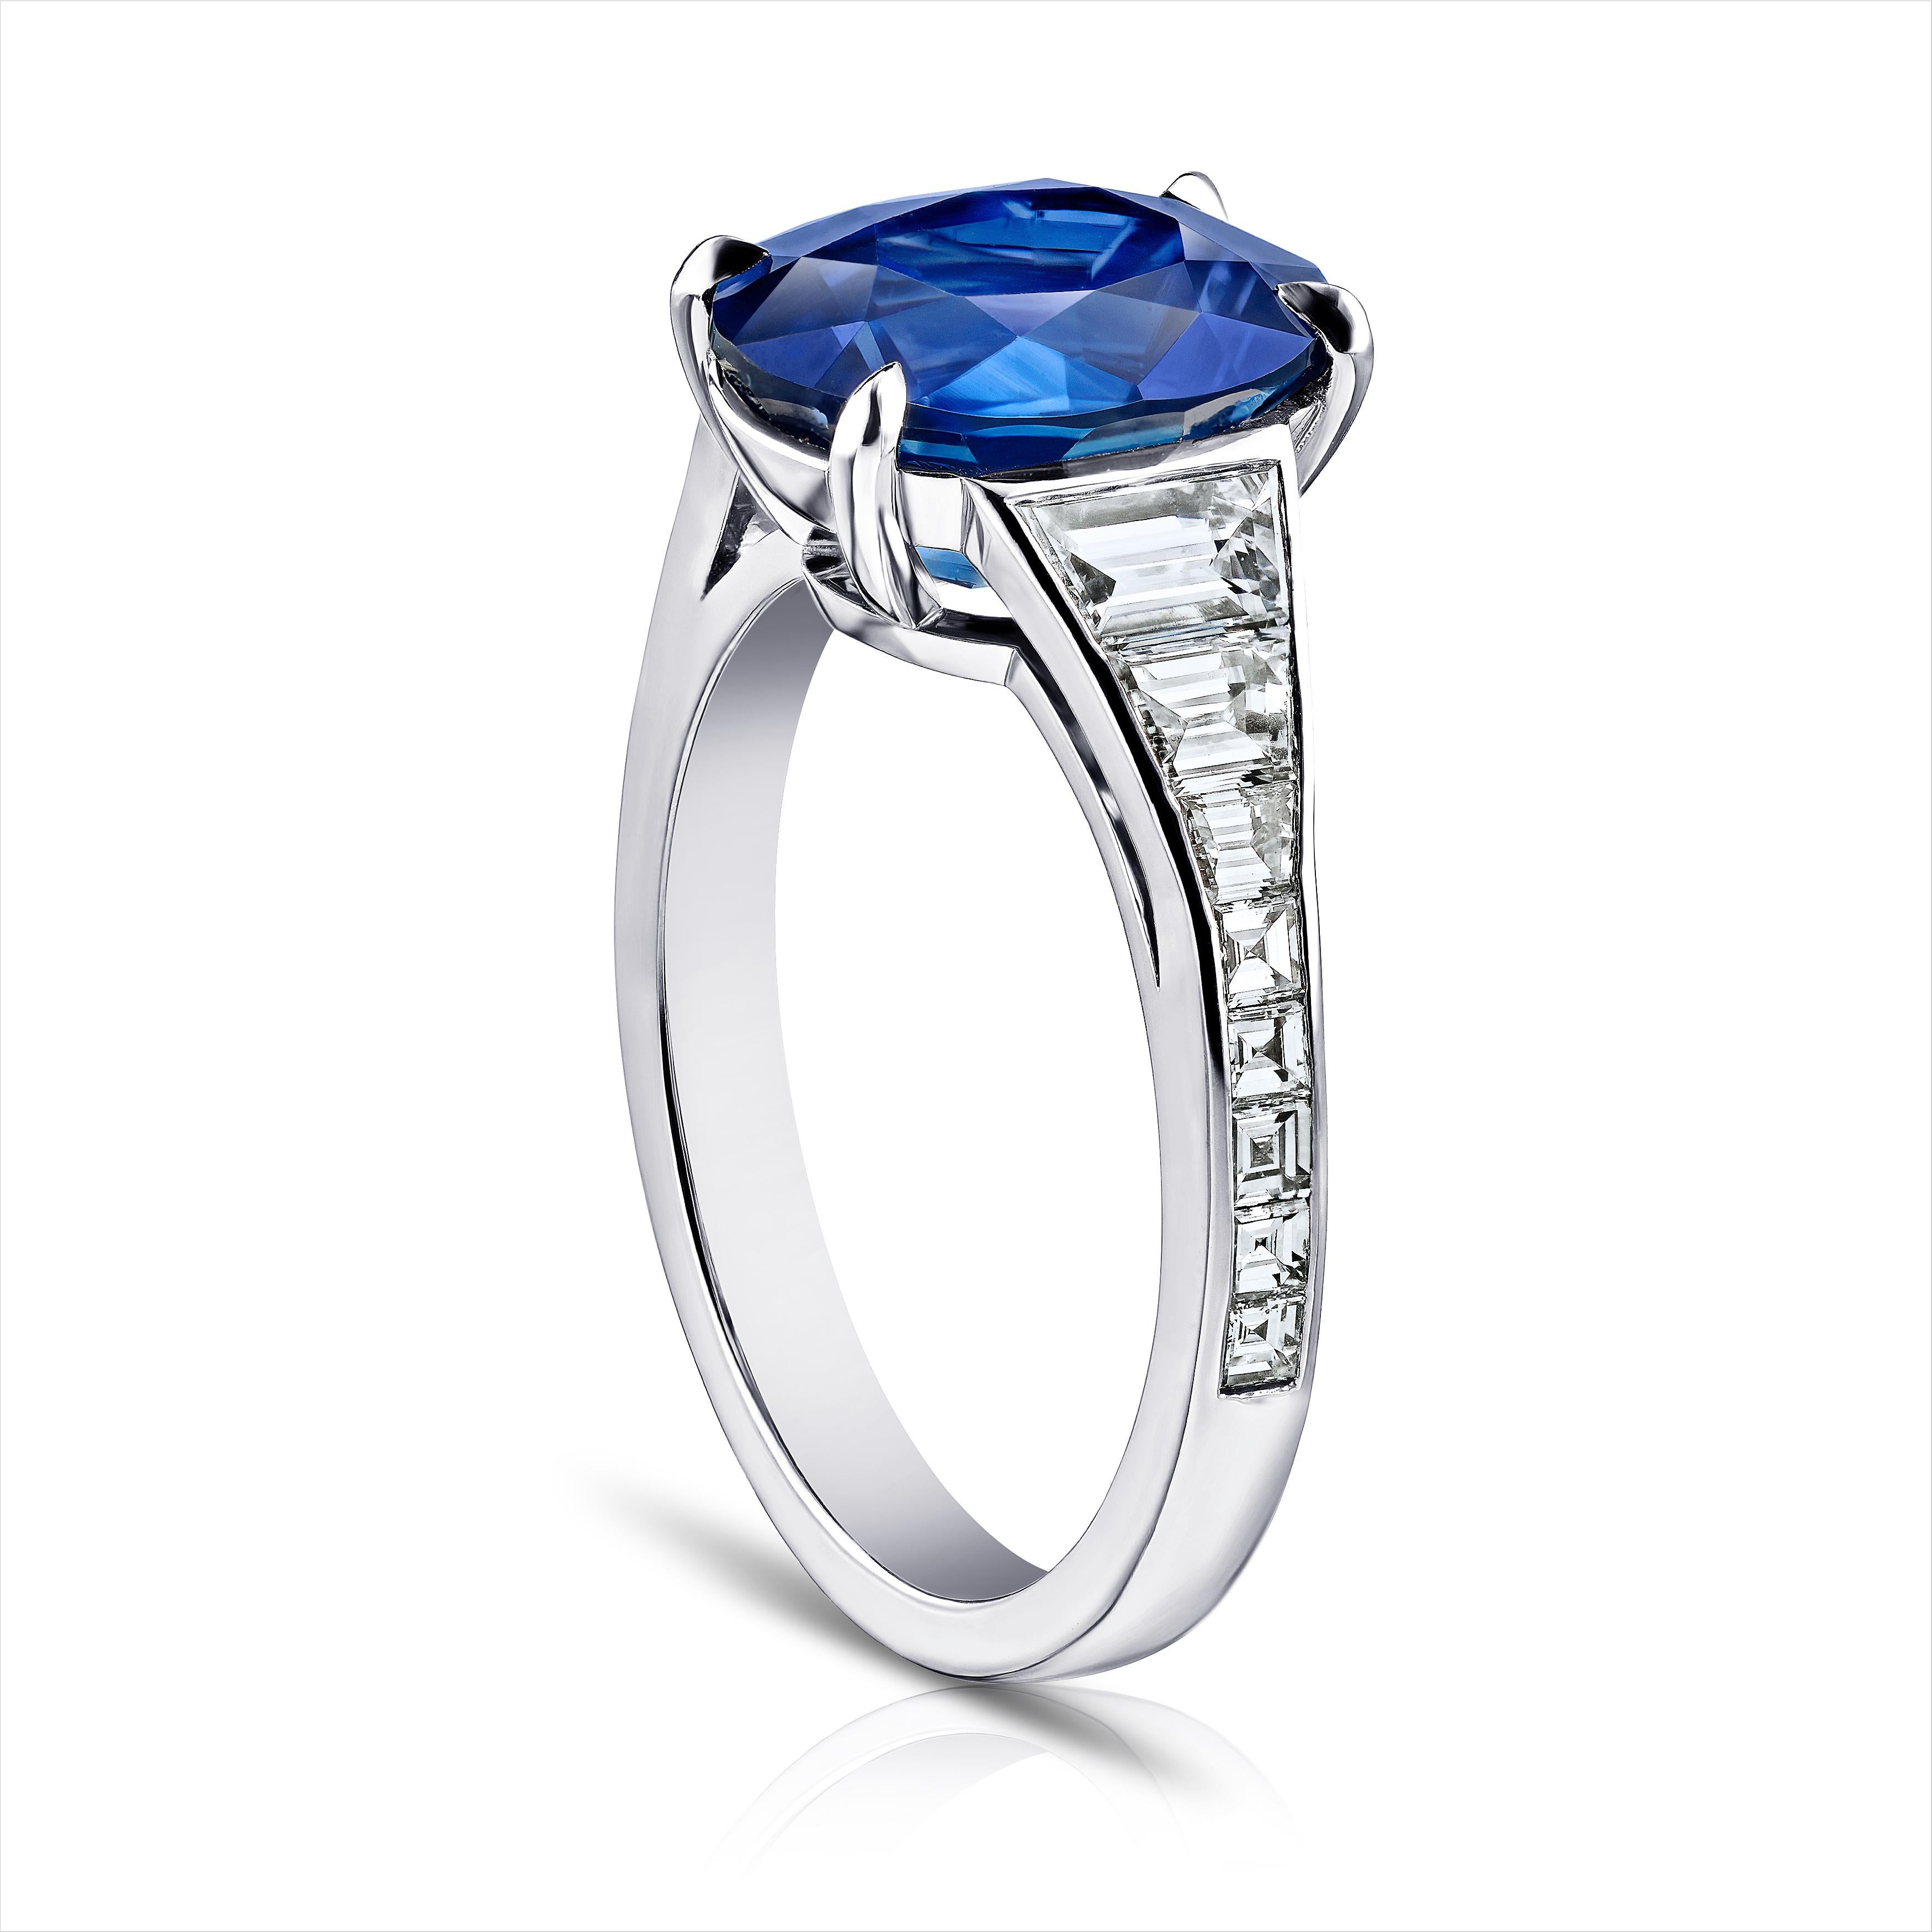 4.91 carat oval blue sapphire with six trapezoid step cut diamonds .83 carats and 10 carre diamonds .30 carats set in a platinum ring.